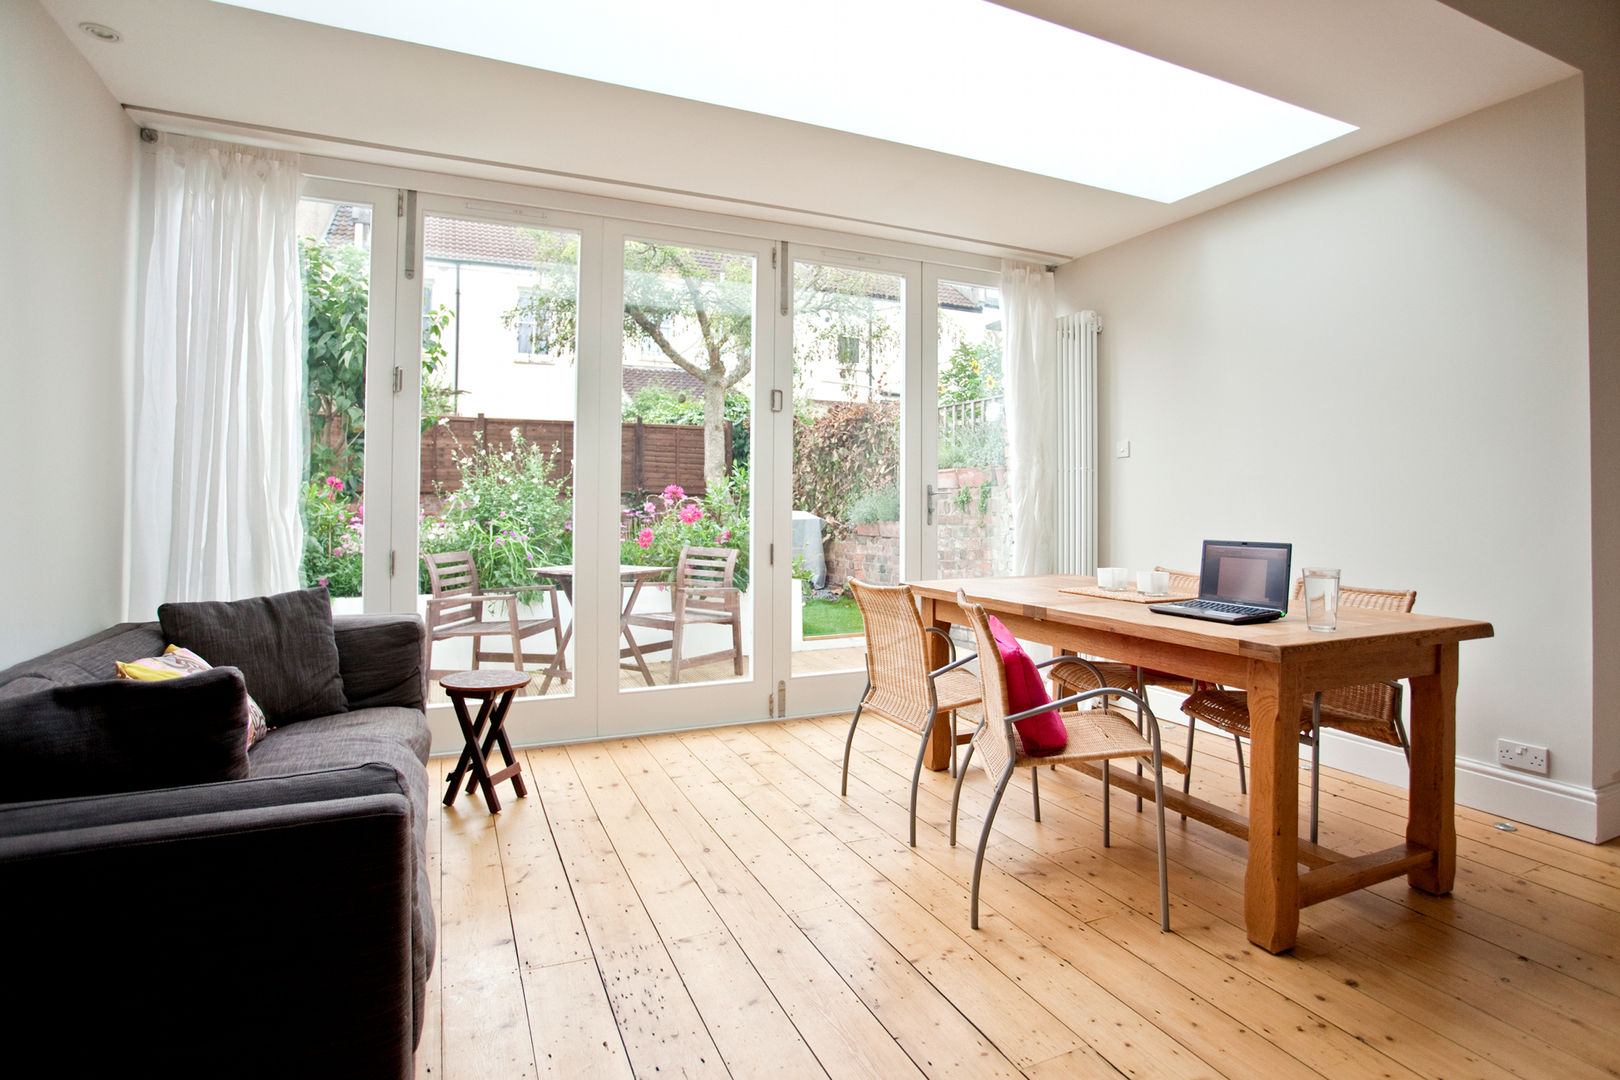 Rear extension and remodelling in Central Bristol Dittrich Hudson Vasetti Architects 모던스타일 다이닝 룸